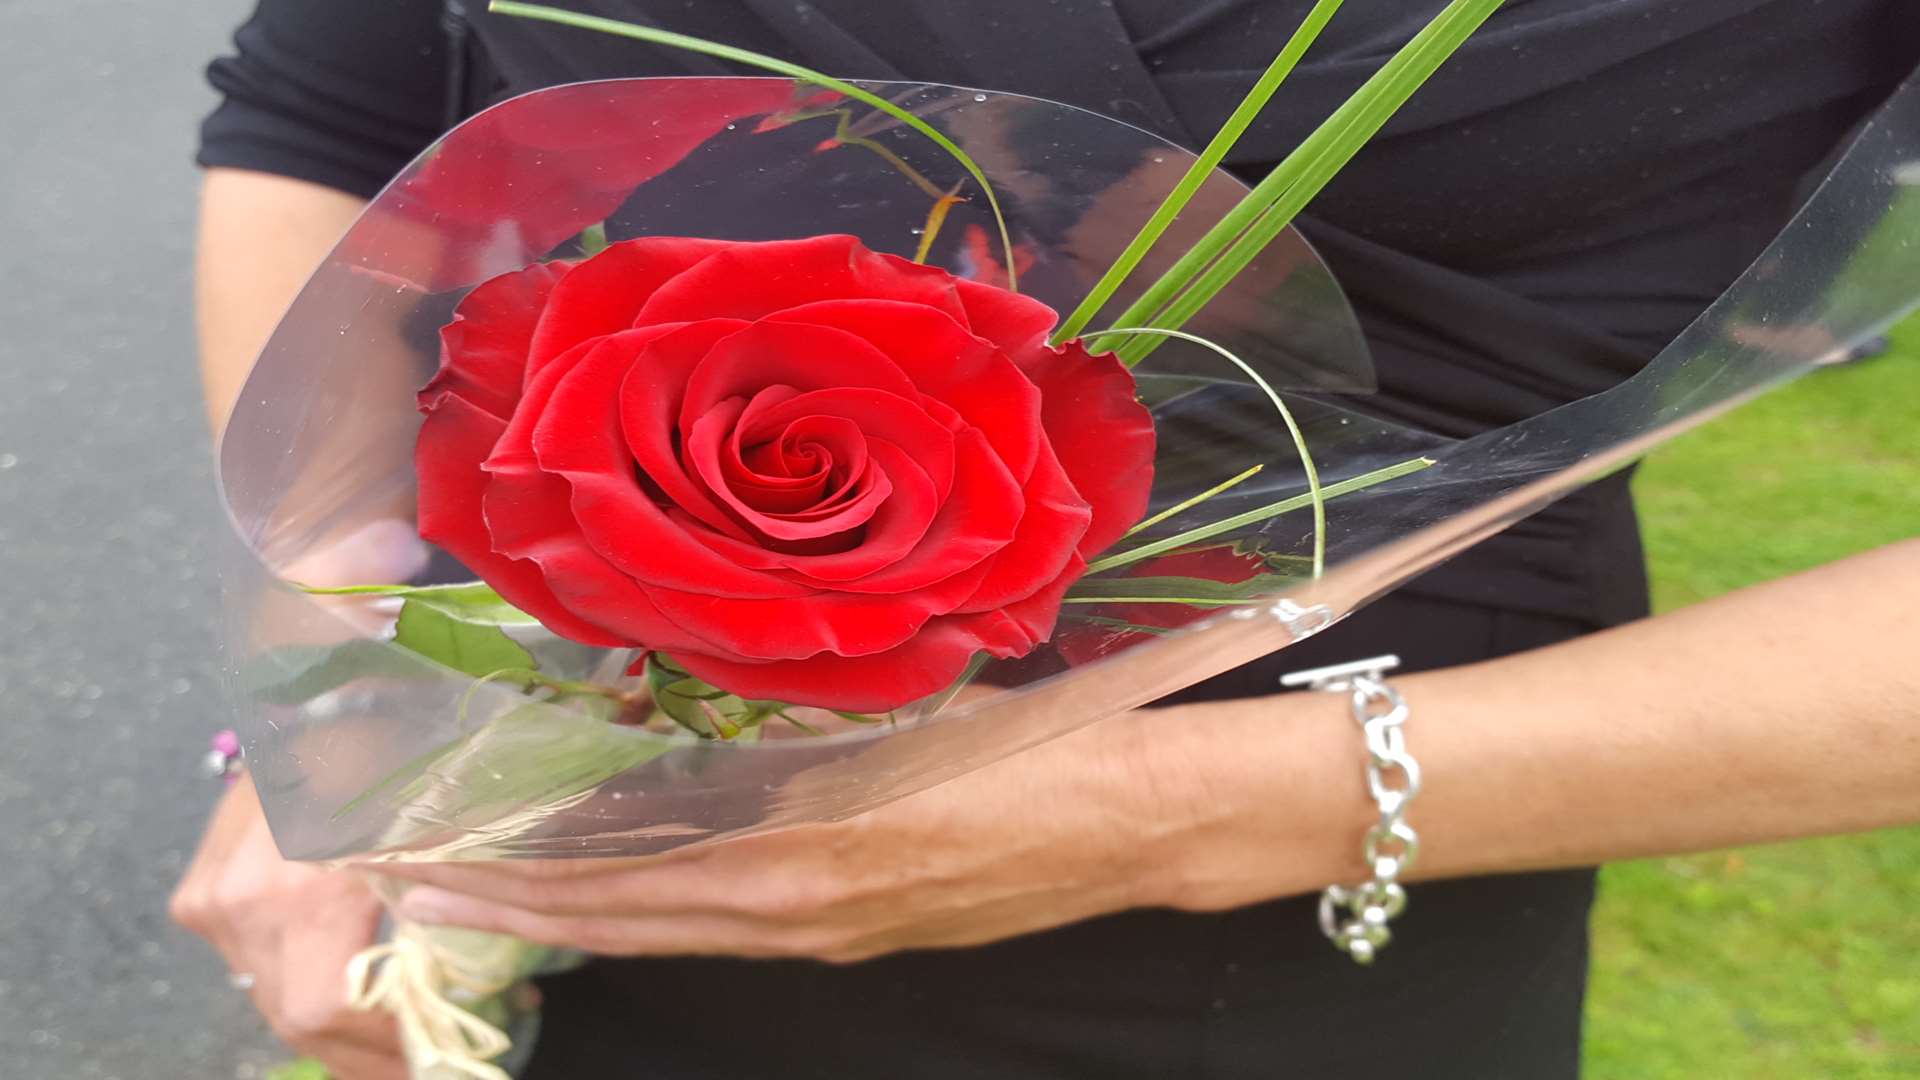 A rose is held as tribute to tragic Taiyah